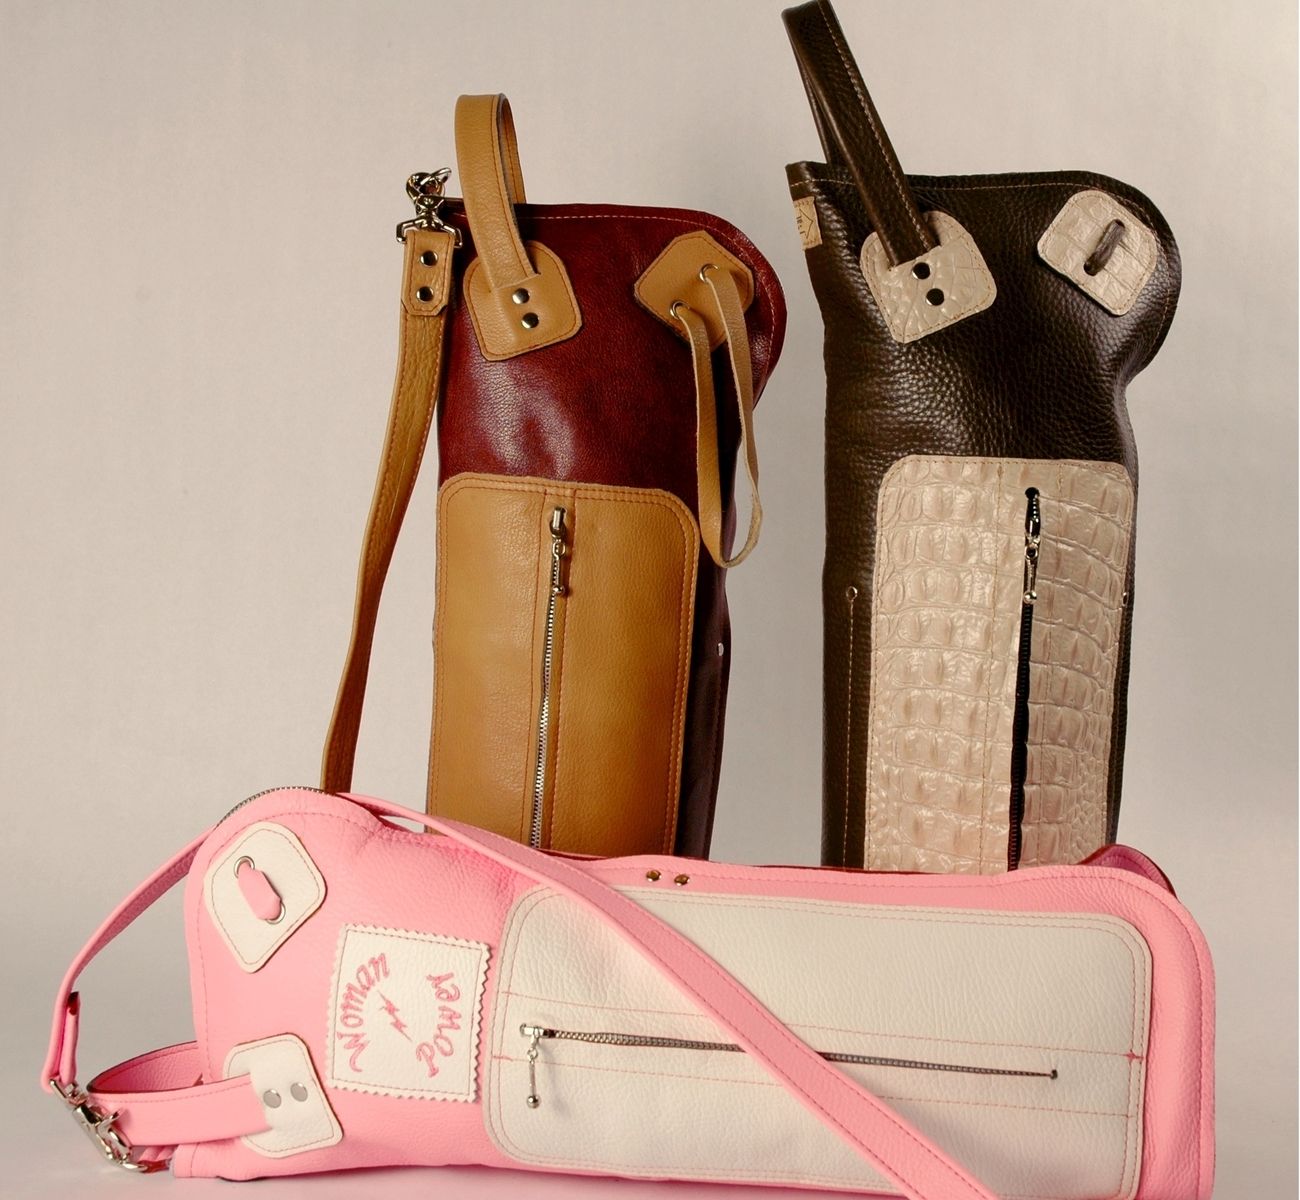 Handmade Custom Made Leather Drumstick Bags by Dallas Designing Dreams | 0